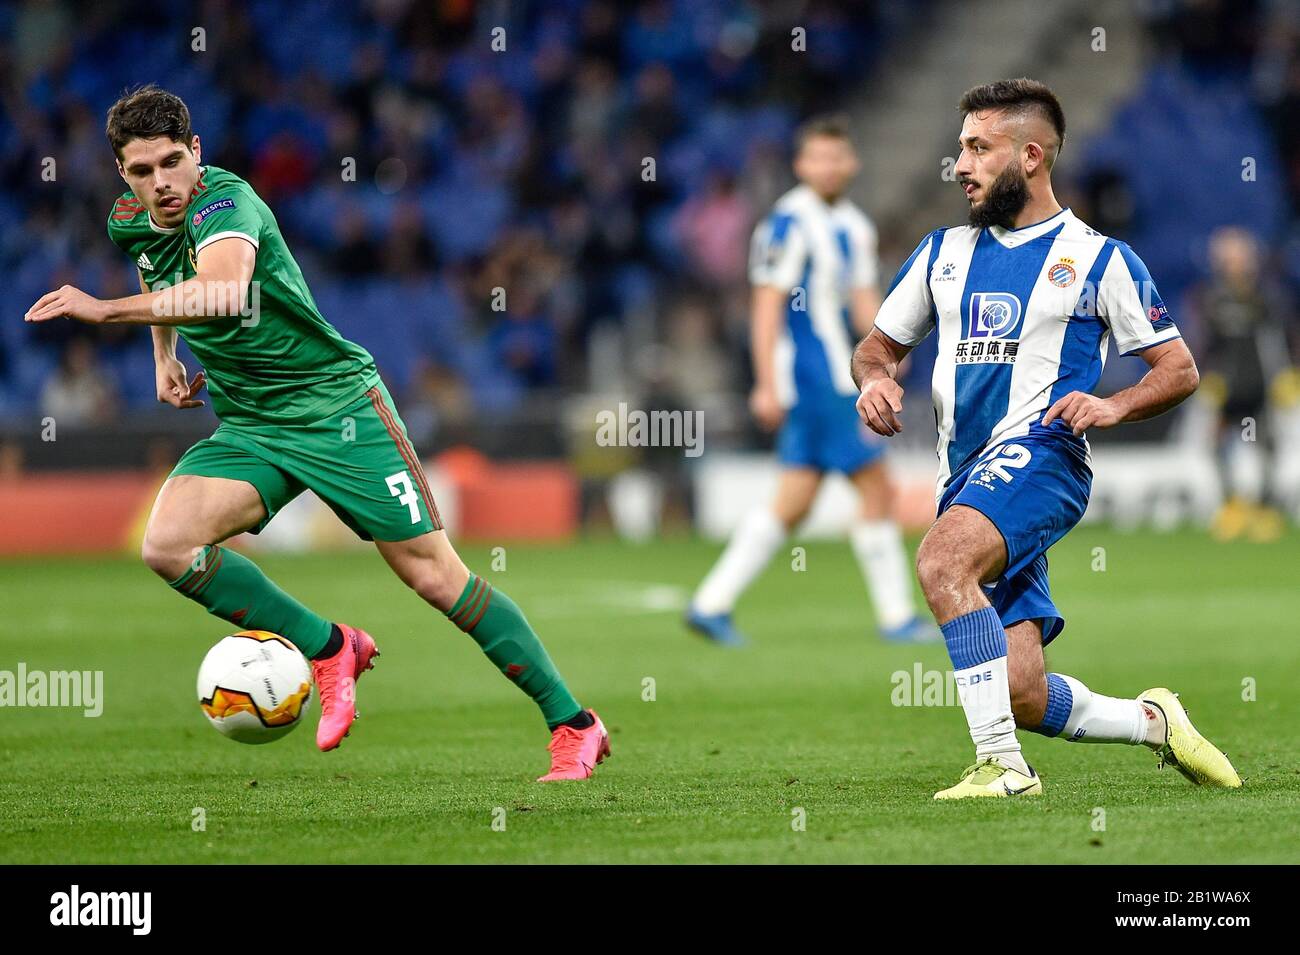 Barcelona, Spain. 27th Feb 2020.  Matias Vargas of RCD Espanyol during the UEFA Europa League round of 32 second leg match between RCD Espanyol and Wolverhampton Wanderers at RCD Stadium on February 27, 2020 in Barcelona, Spain. Credit: Dax Images/Alamy Live News Stock Photo